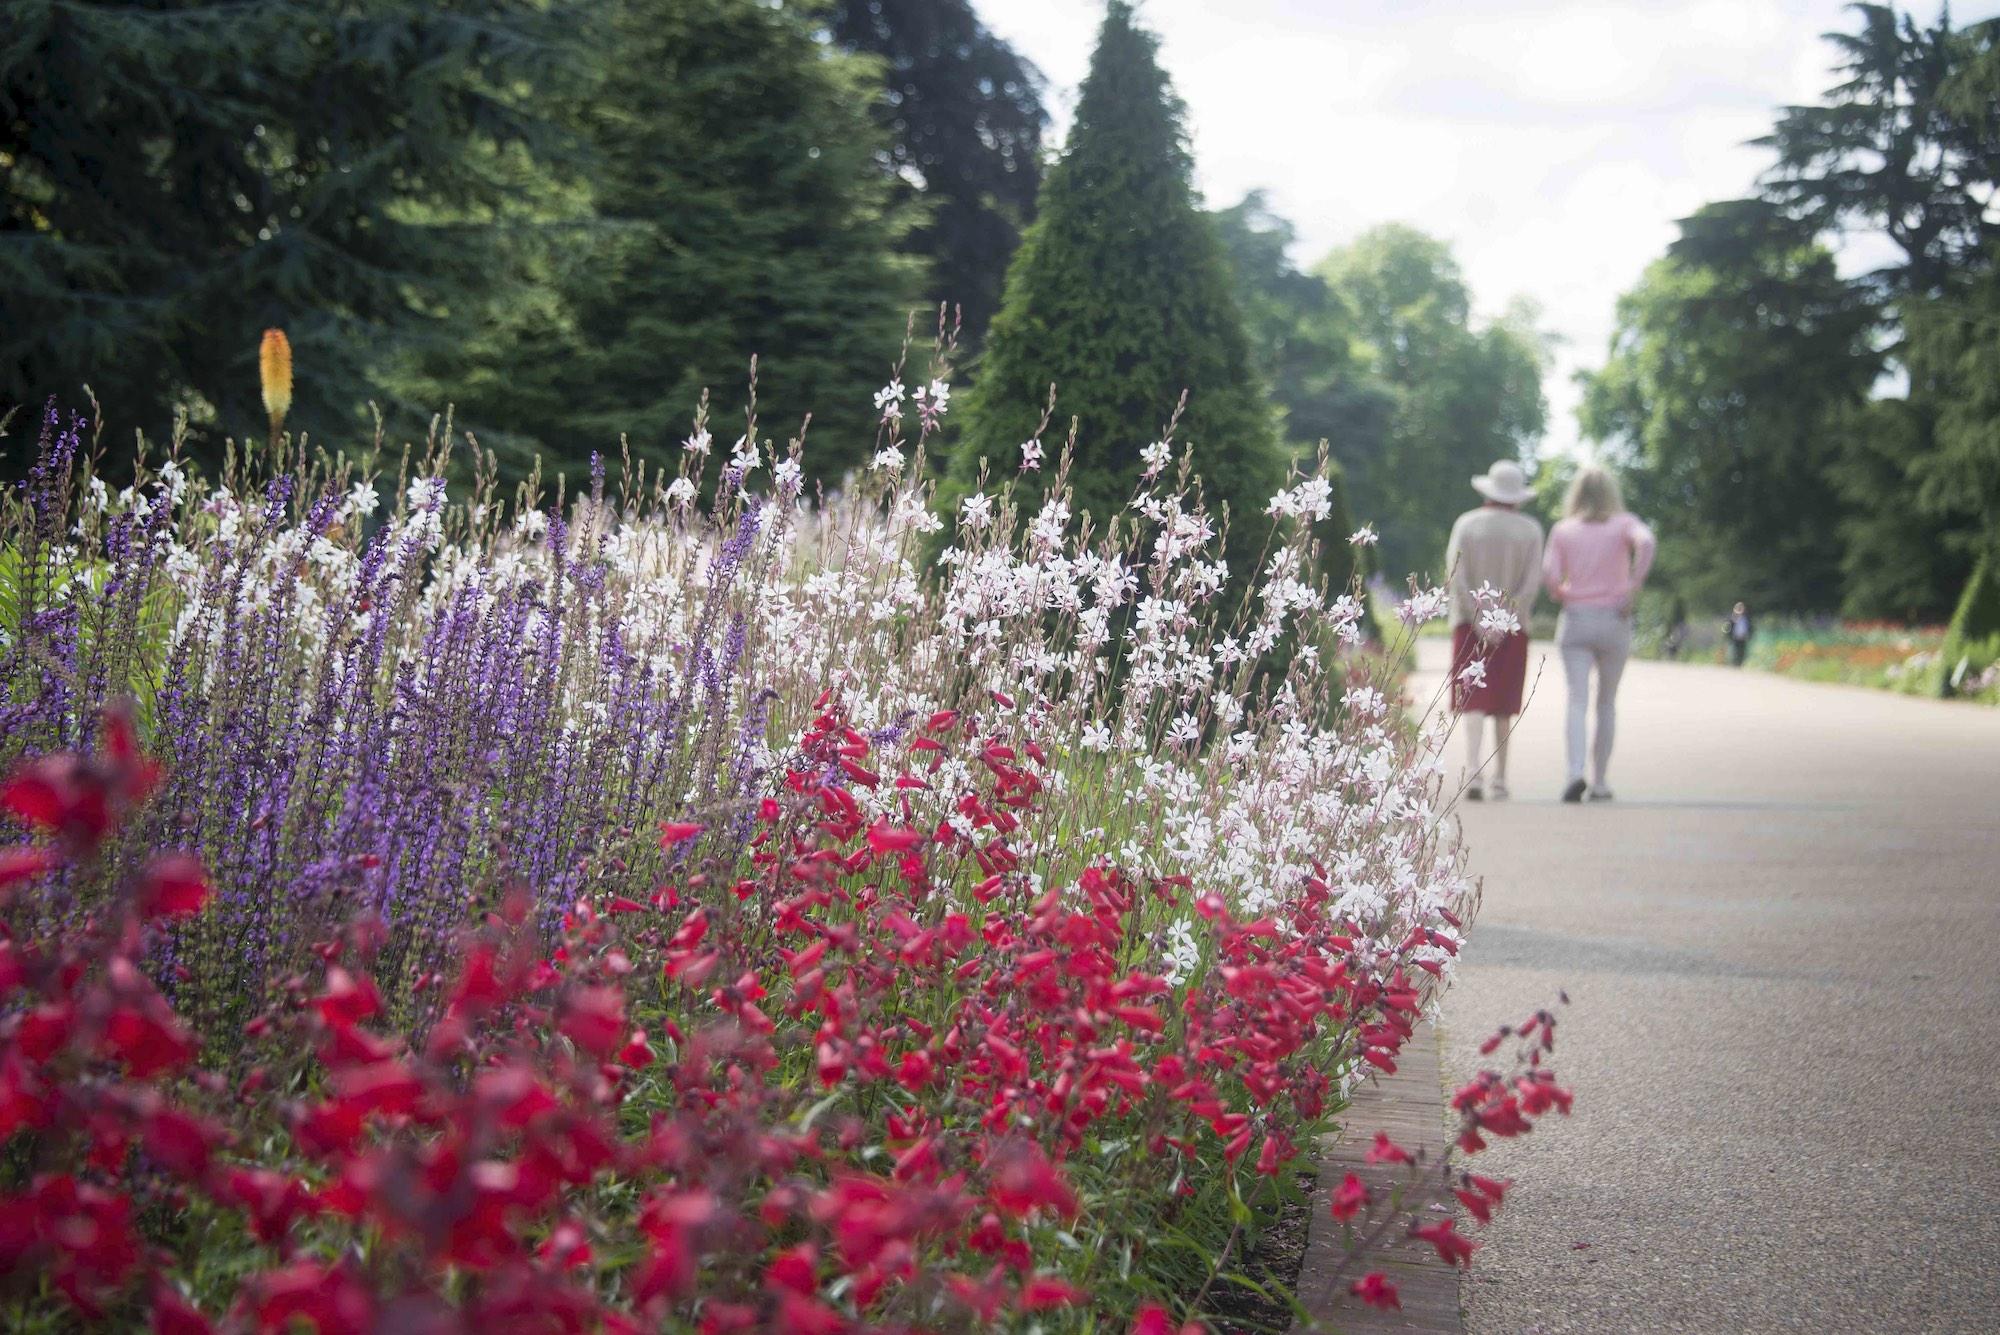 The longest double herbaceous border in the UK, the Great Broad Walk Borders feature 60,000 flowering plants. – © Jeff Eden